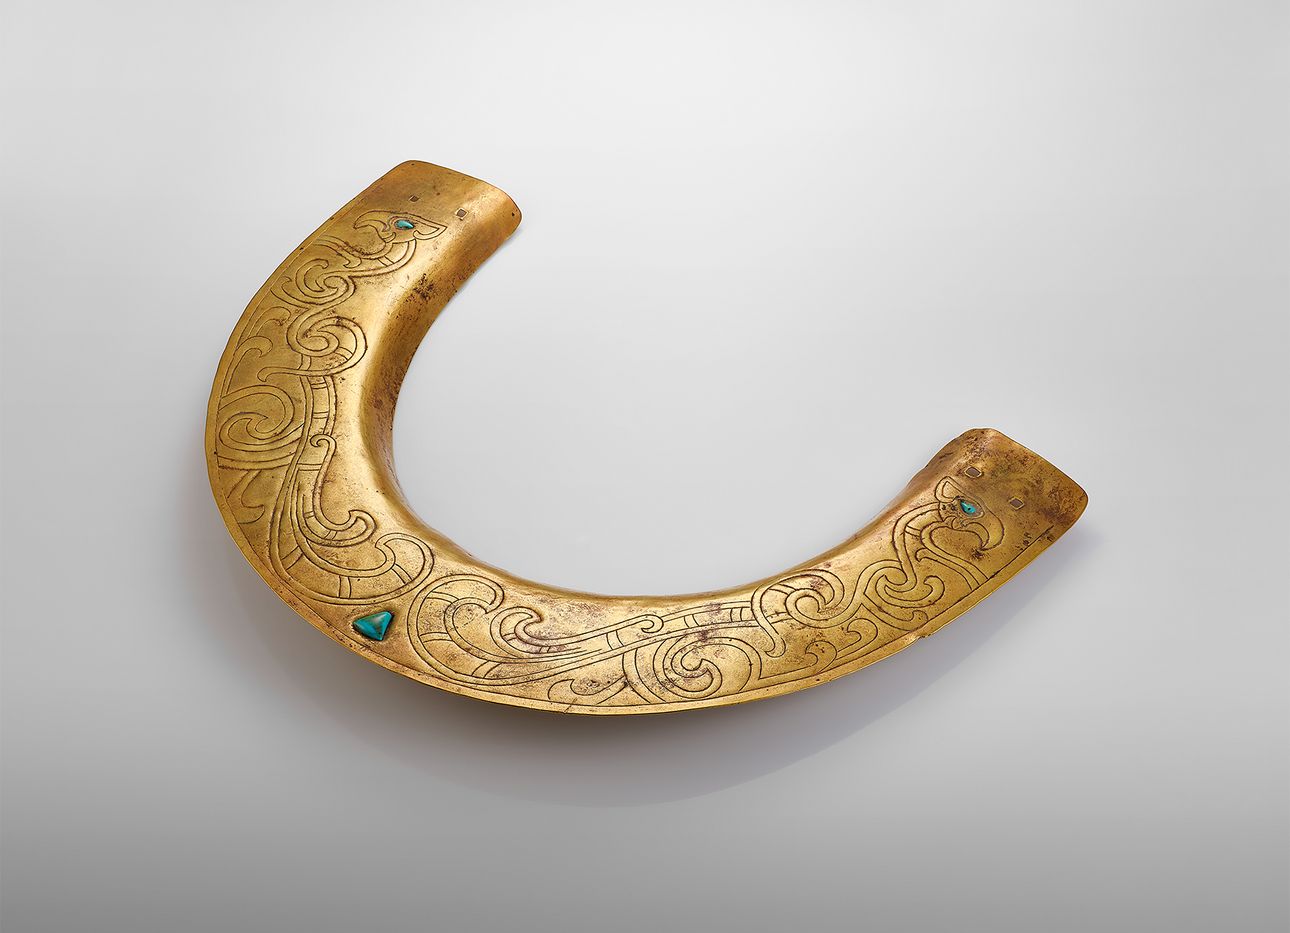 China hammered and chased gold neck ornament, 4th to 3rd century B.C.E. Mengdiexuan Collection, Hong Kong. (Courtesy L’École, School of Jewelry Arts)